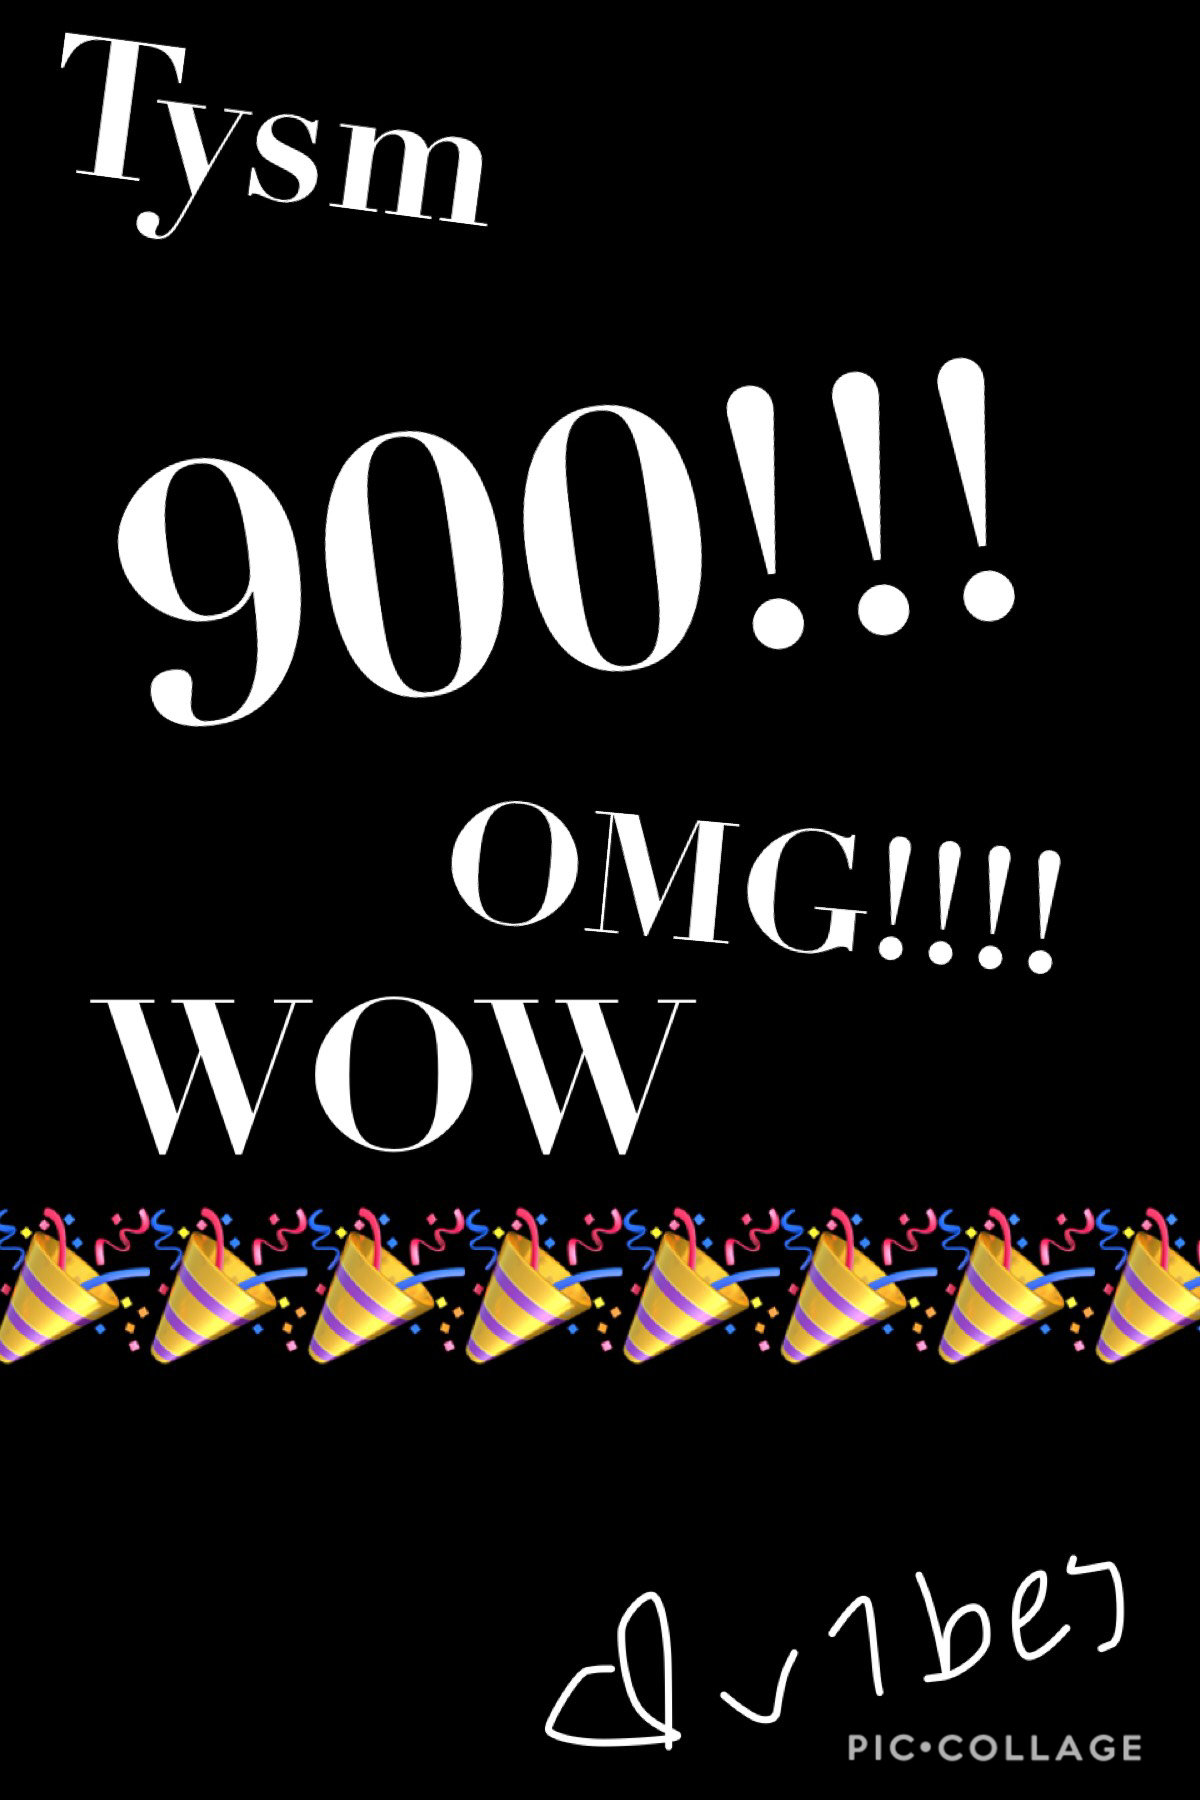 I can’t believe how close we are to 1000 it ABSOLUTELY UNBELIEVABLE! I love you all so much💗 thank you for supporting me!